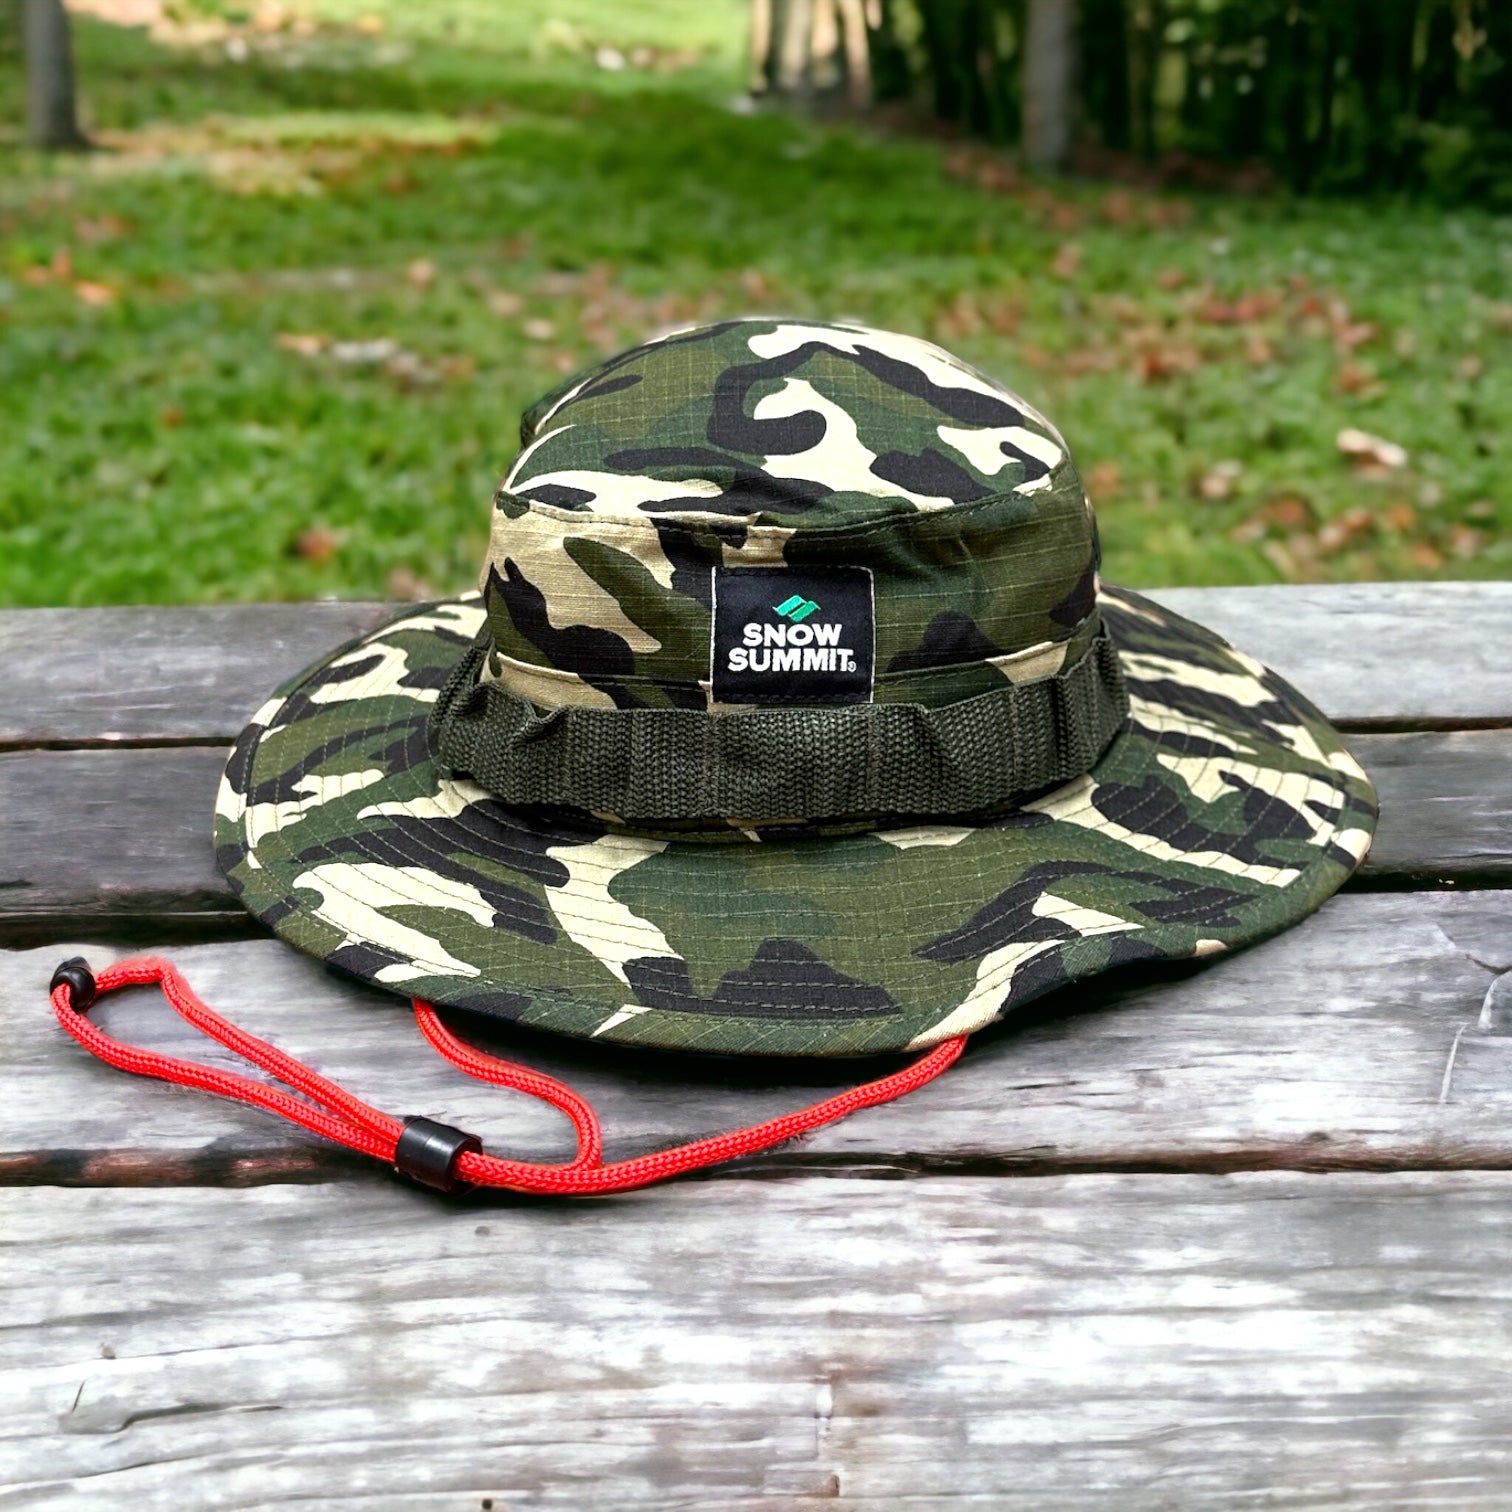 Snow Summit Boonie Hat in camo with red drawstring